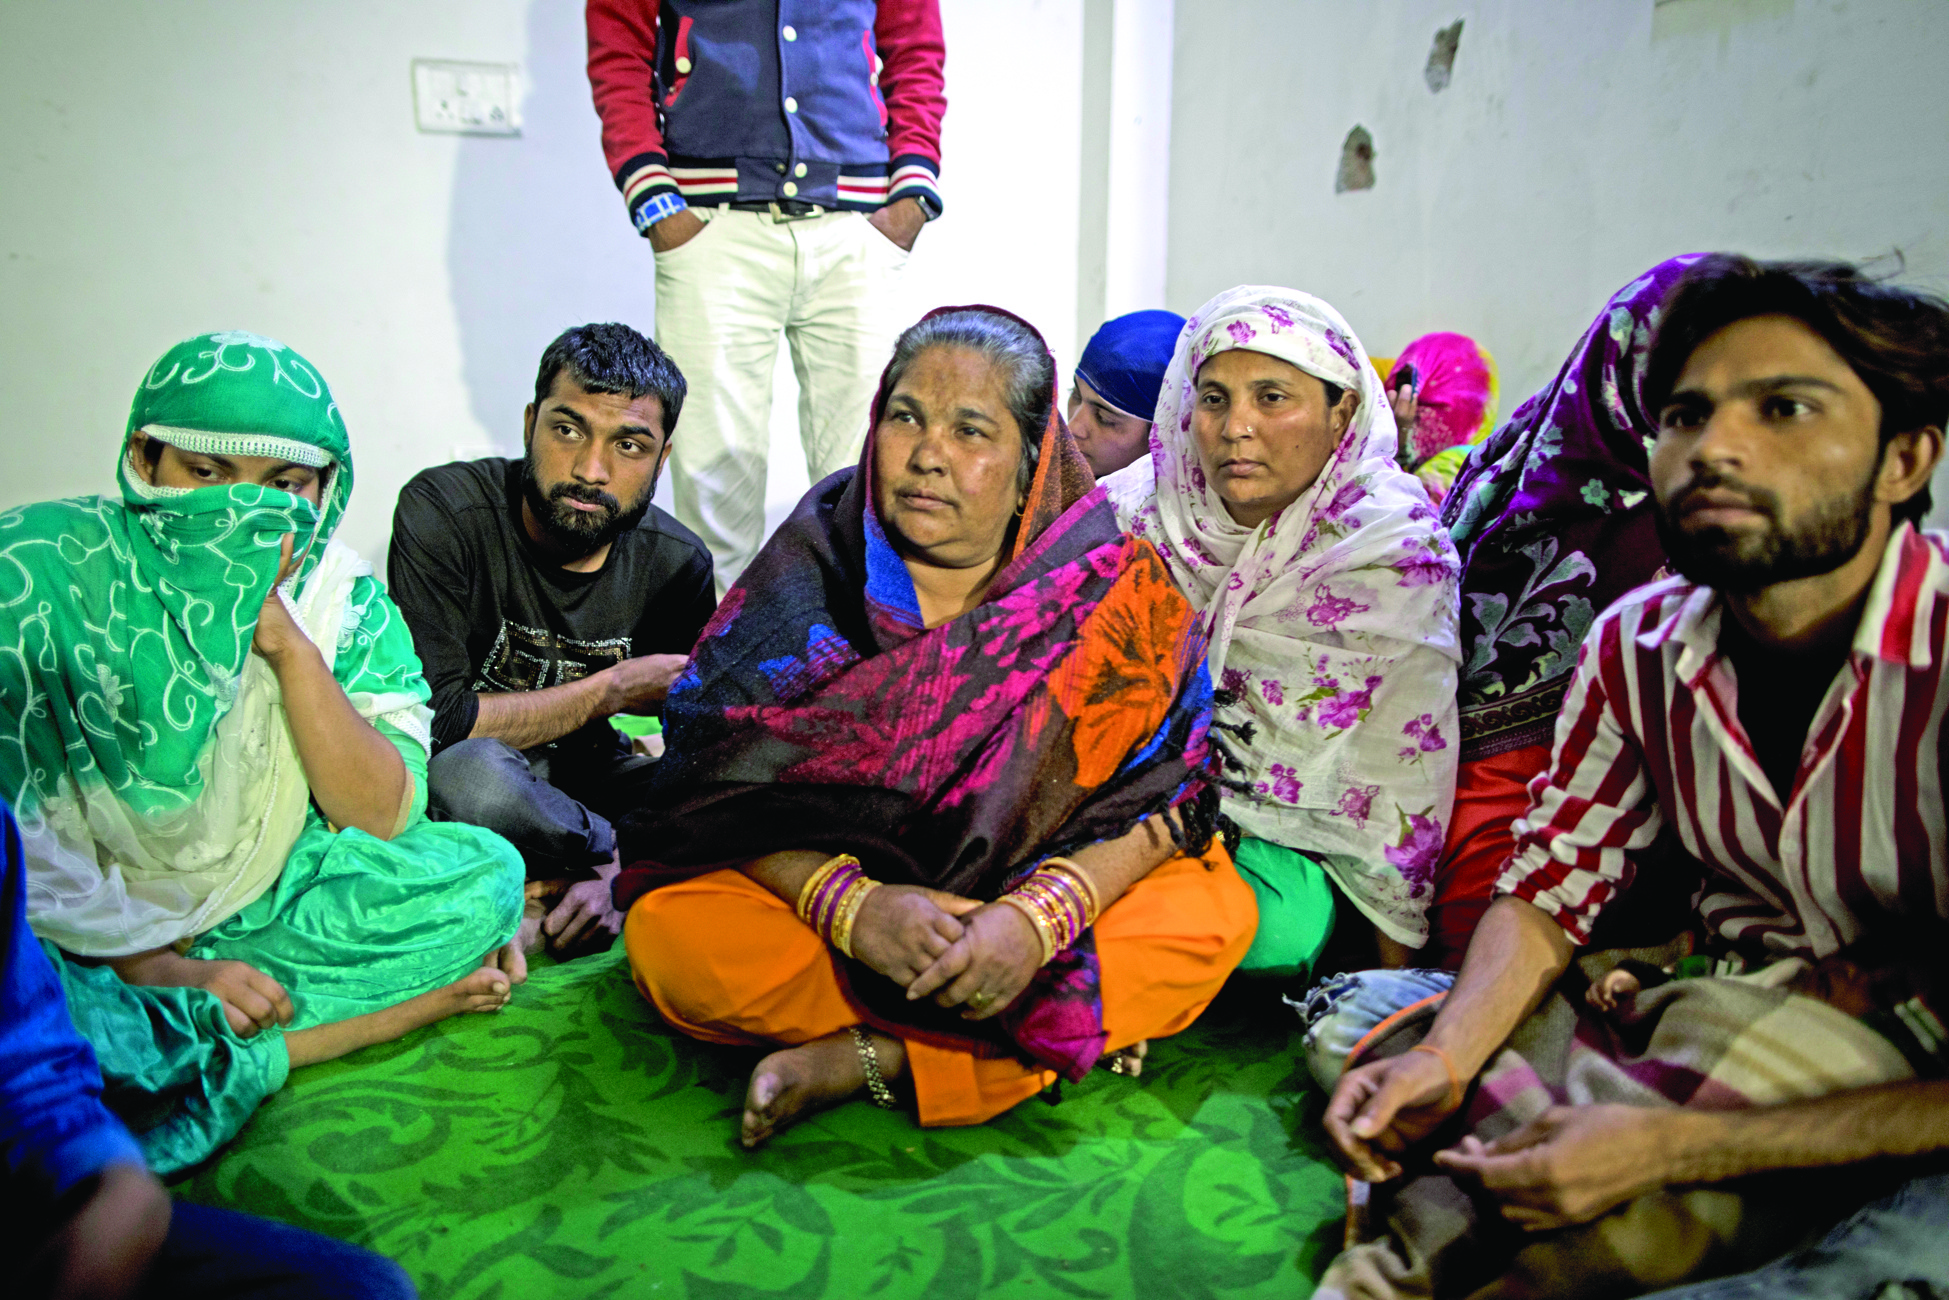 Parveen (C) sits with relatives and other families at Al-hind Hospital where they have taken shelter with other families after losing their homes following sectarian riots over India's new citizenship law, in New Delhi on February 28, 2020. - Muslims in India's capital held regular Friday prayers on February 28 under the watch of riot police, capping a week which saw 42 killed and hundreds injured during the city's worst sectarian violence in decades. (Photo by Xavier GALIANA / AFP)